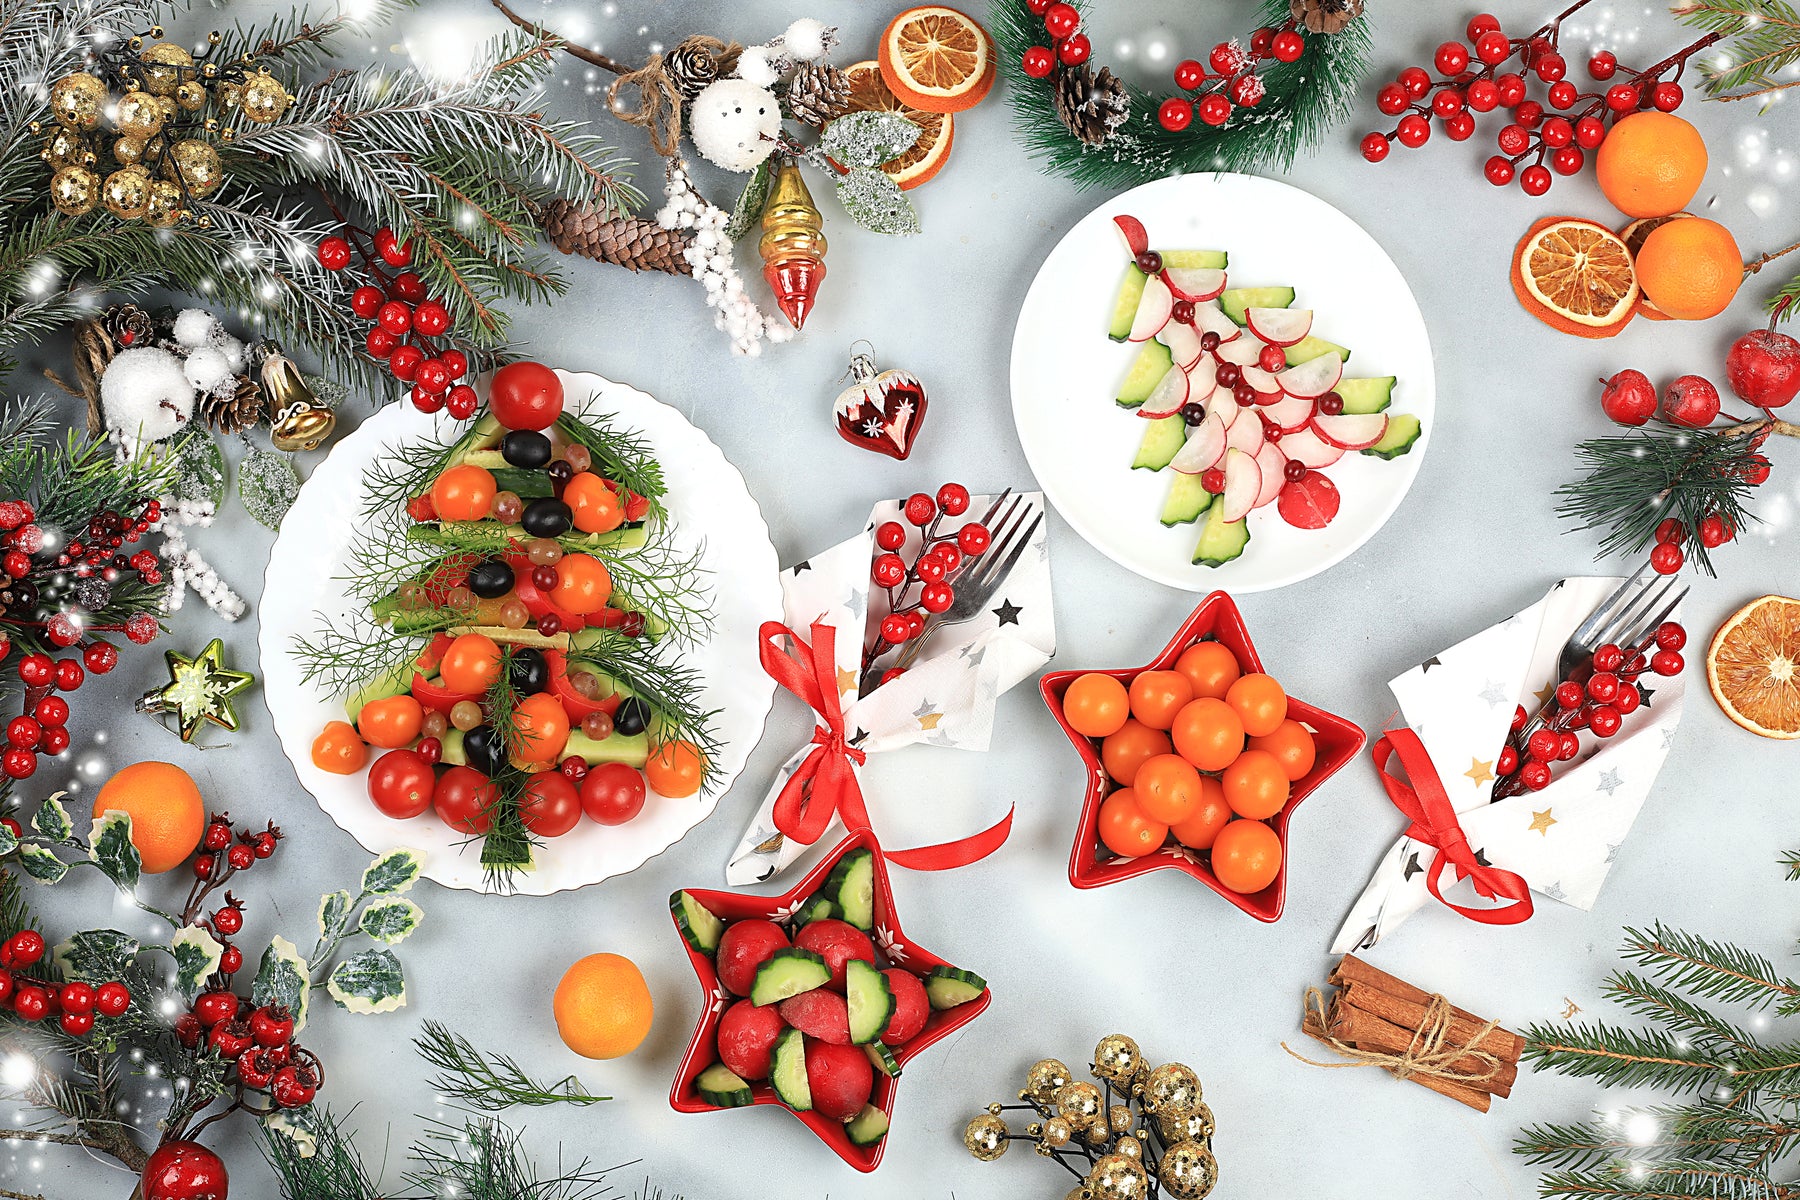 Nutritionist's Top Tips for Healthy Eating This Christmas